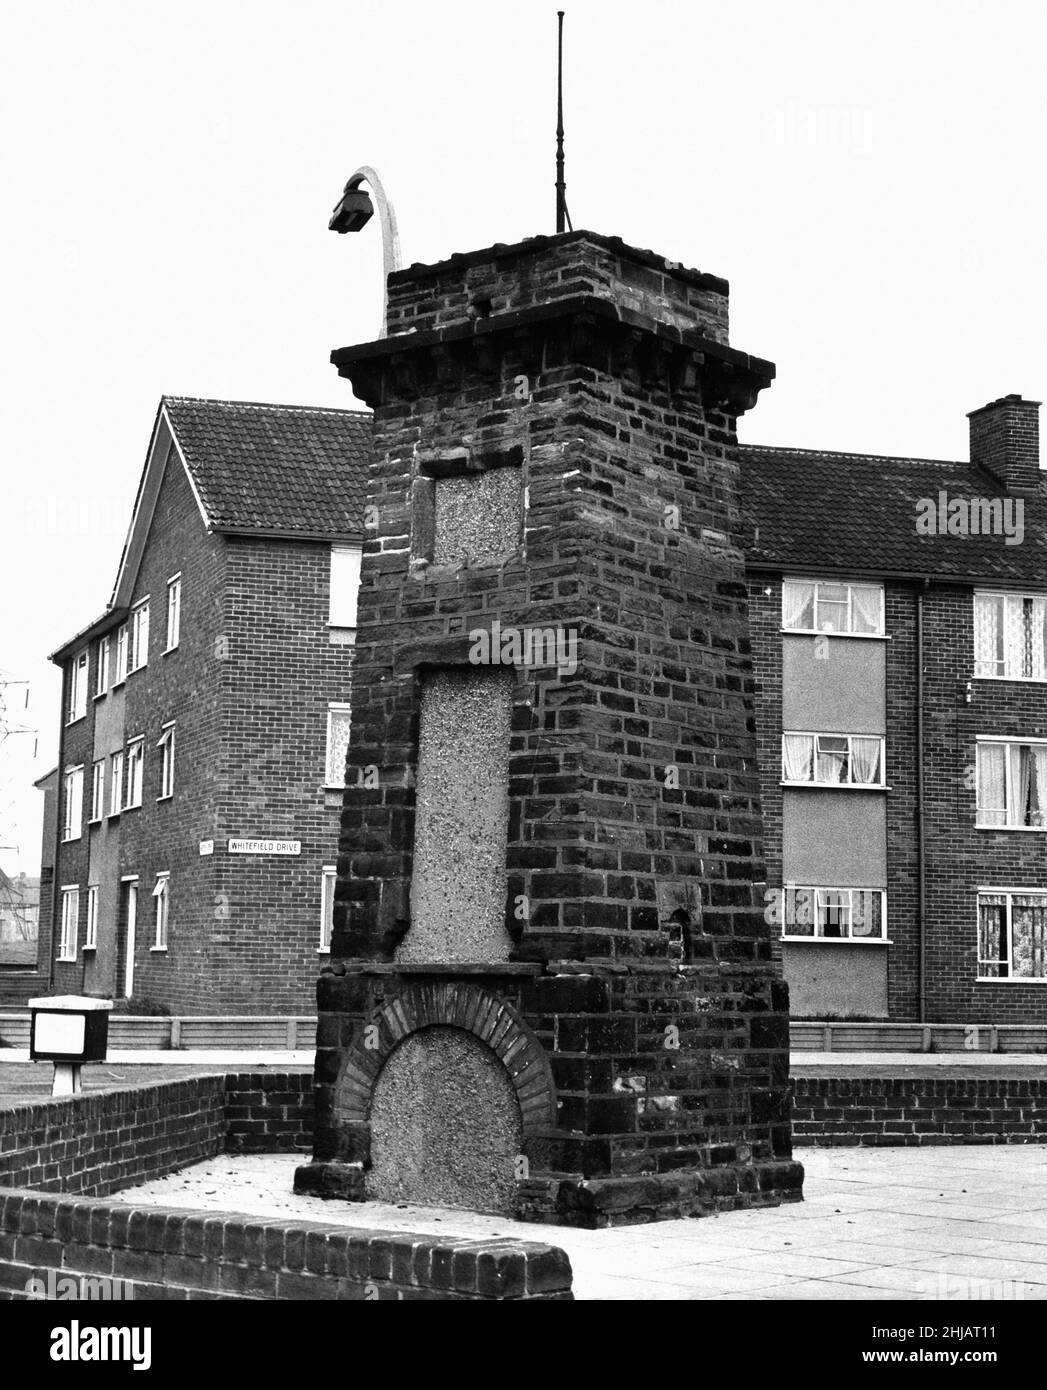 Kirkby, a town in the Metropolitan Borough of Knowsley, Merseyside, England. Our picture shows, old stone structure known as the Pigeon House and originally used as a dovecote (used to house doves) at the junction of Whitefield Drive with Ingoe Lane, 25th May 1962. Stock Photo